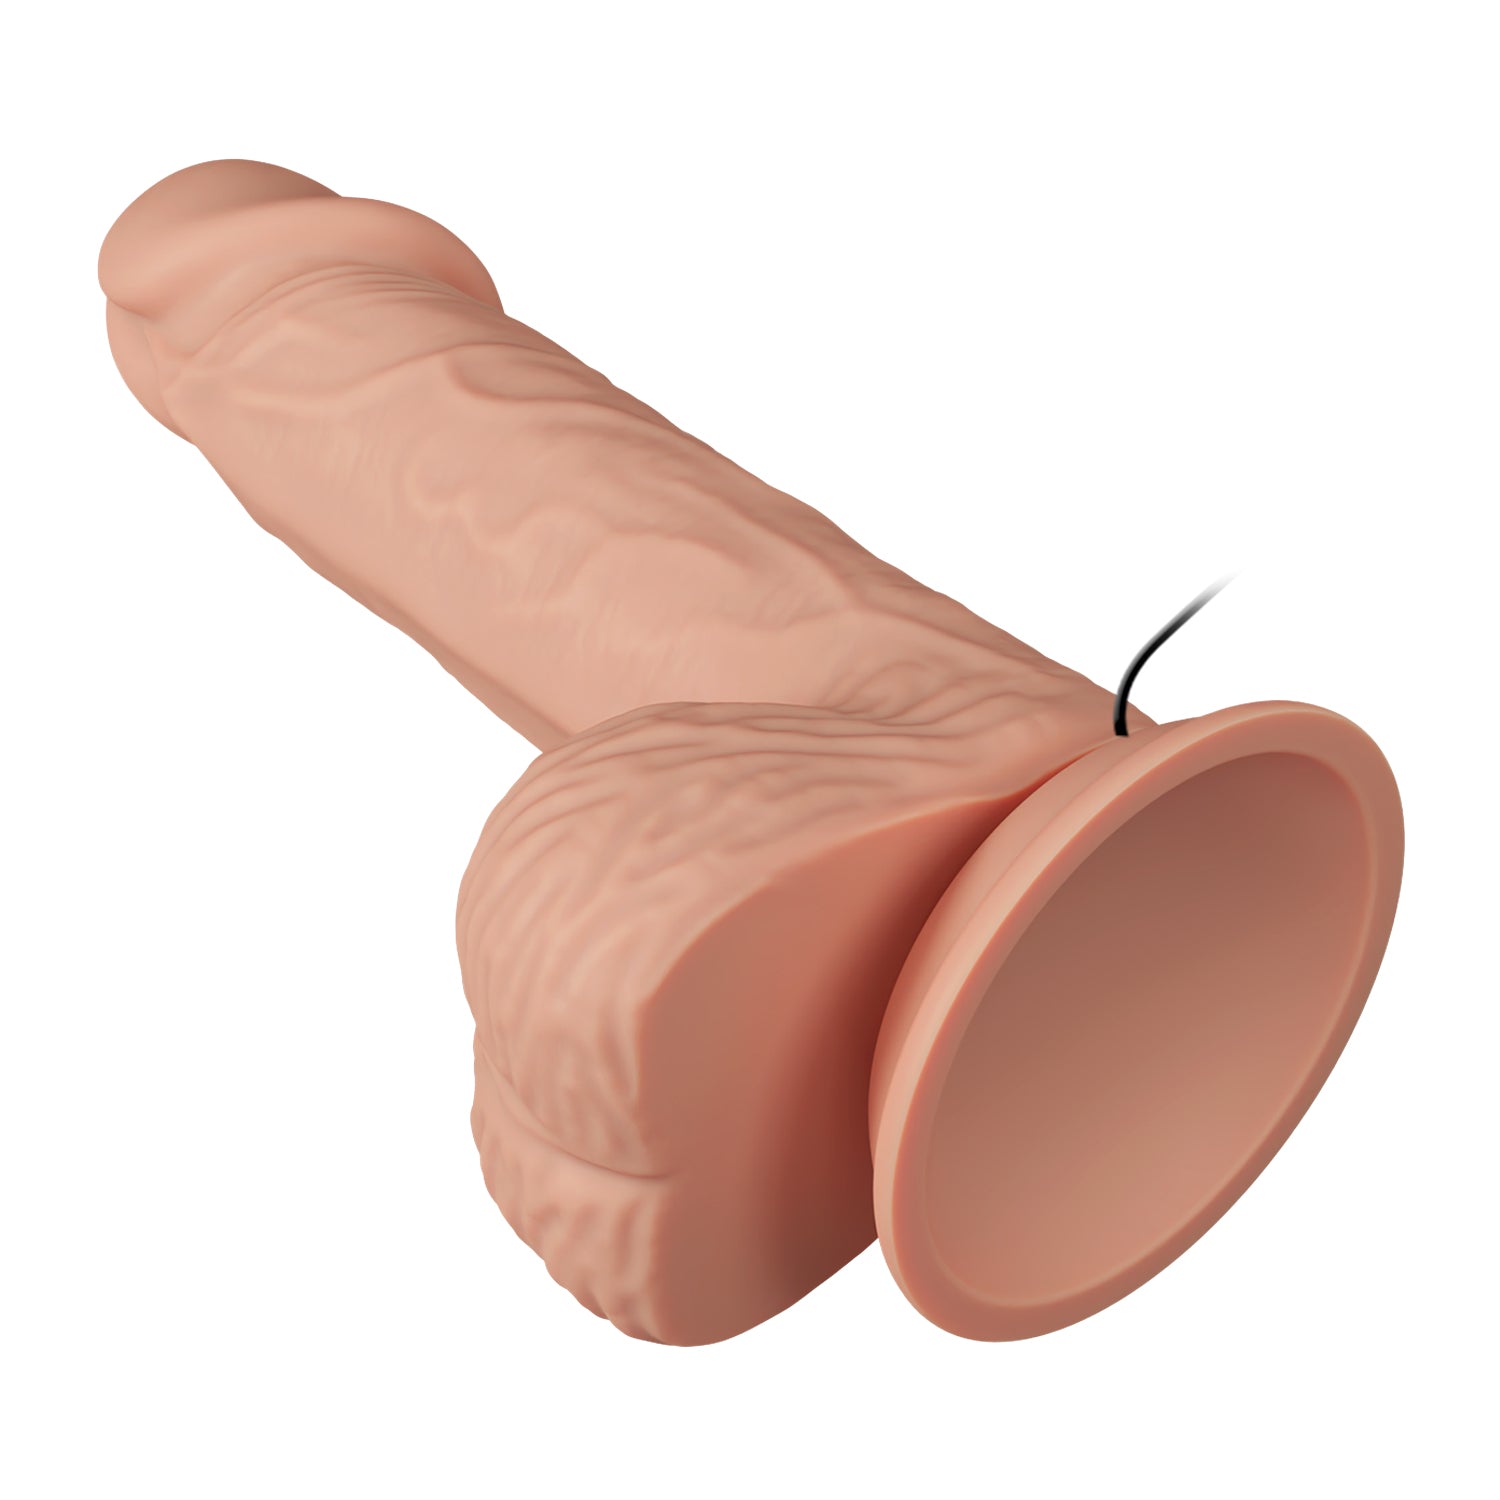 Baile 8.1 Inch Lifelike Vibrating Dildo with Suction Cup in Flesh